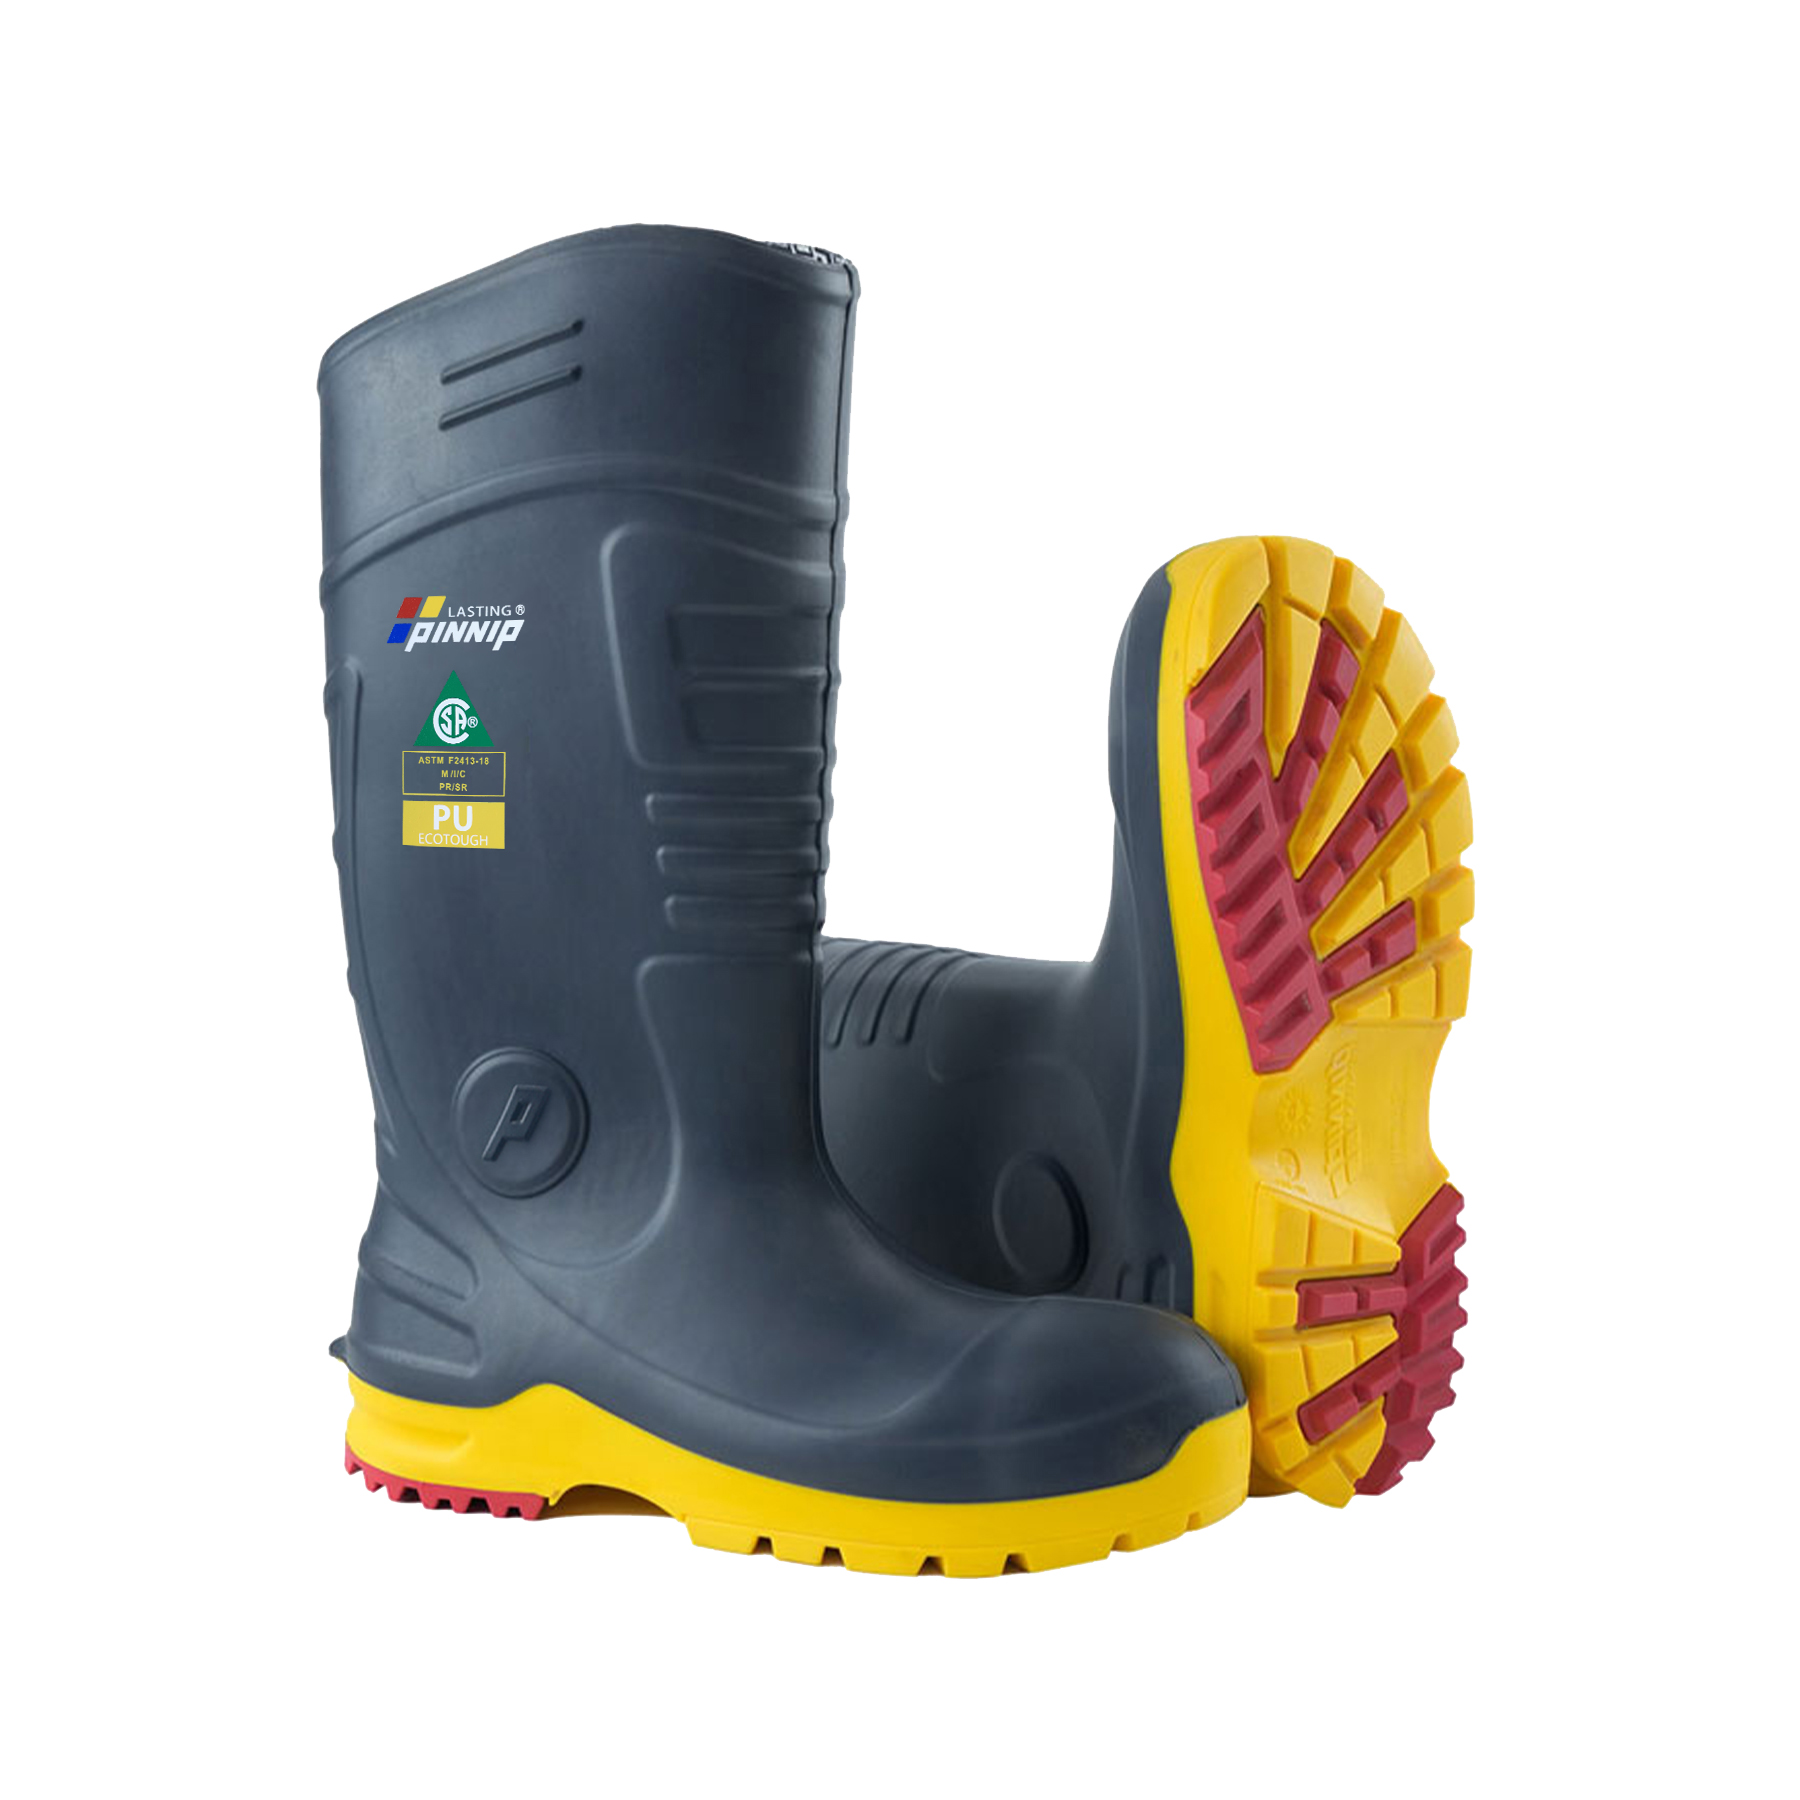 Infinix Protective Boots For Spring & Summer - Grey